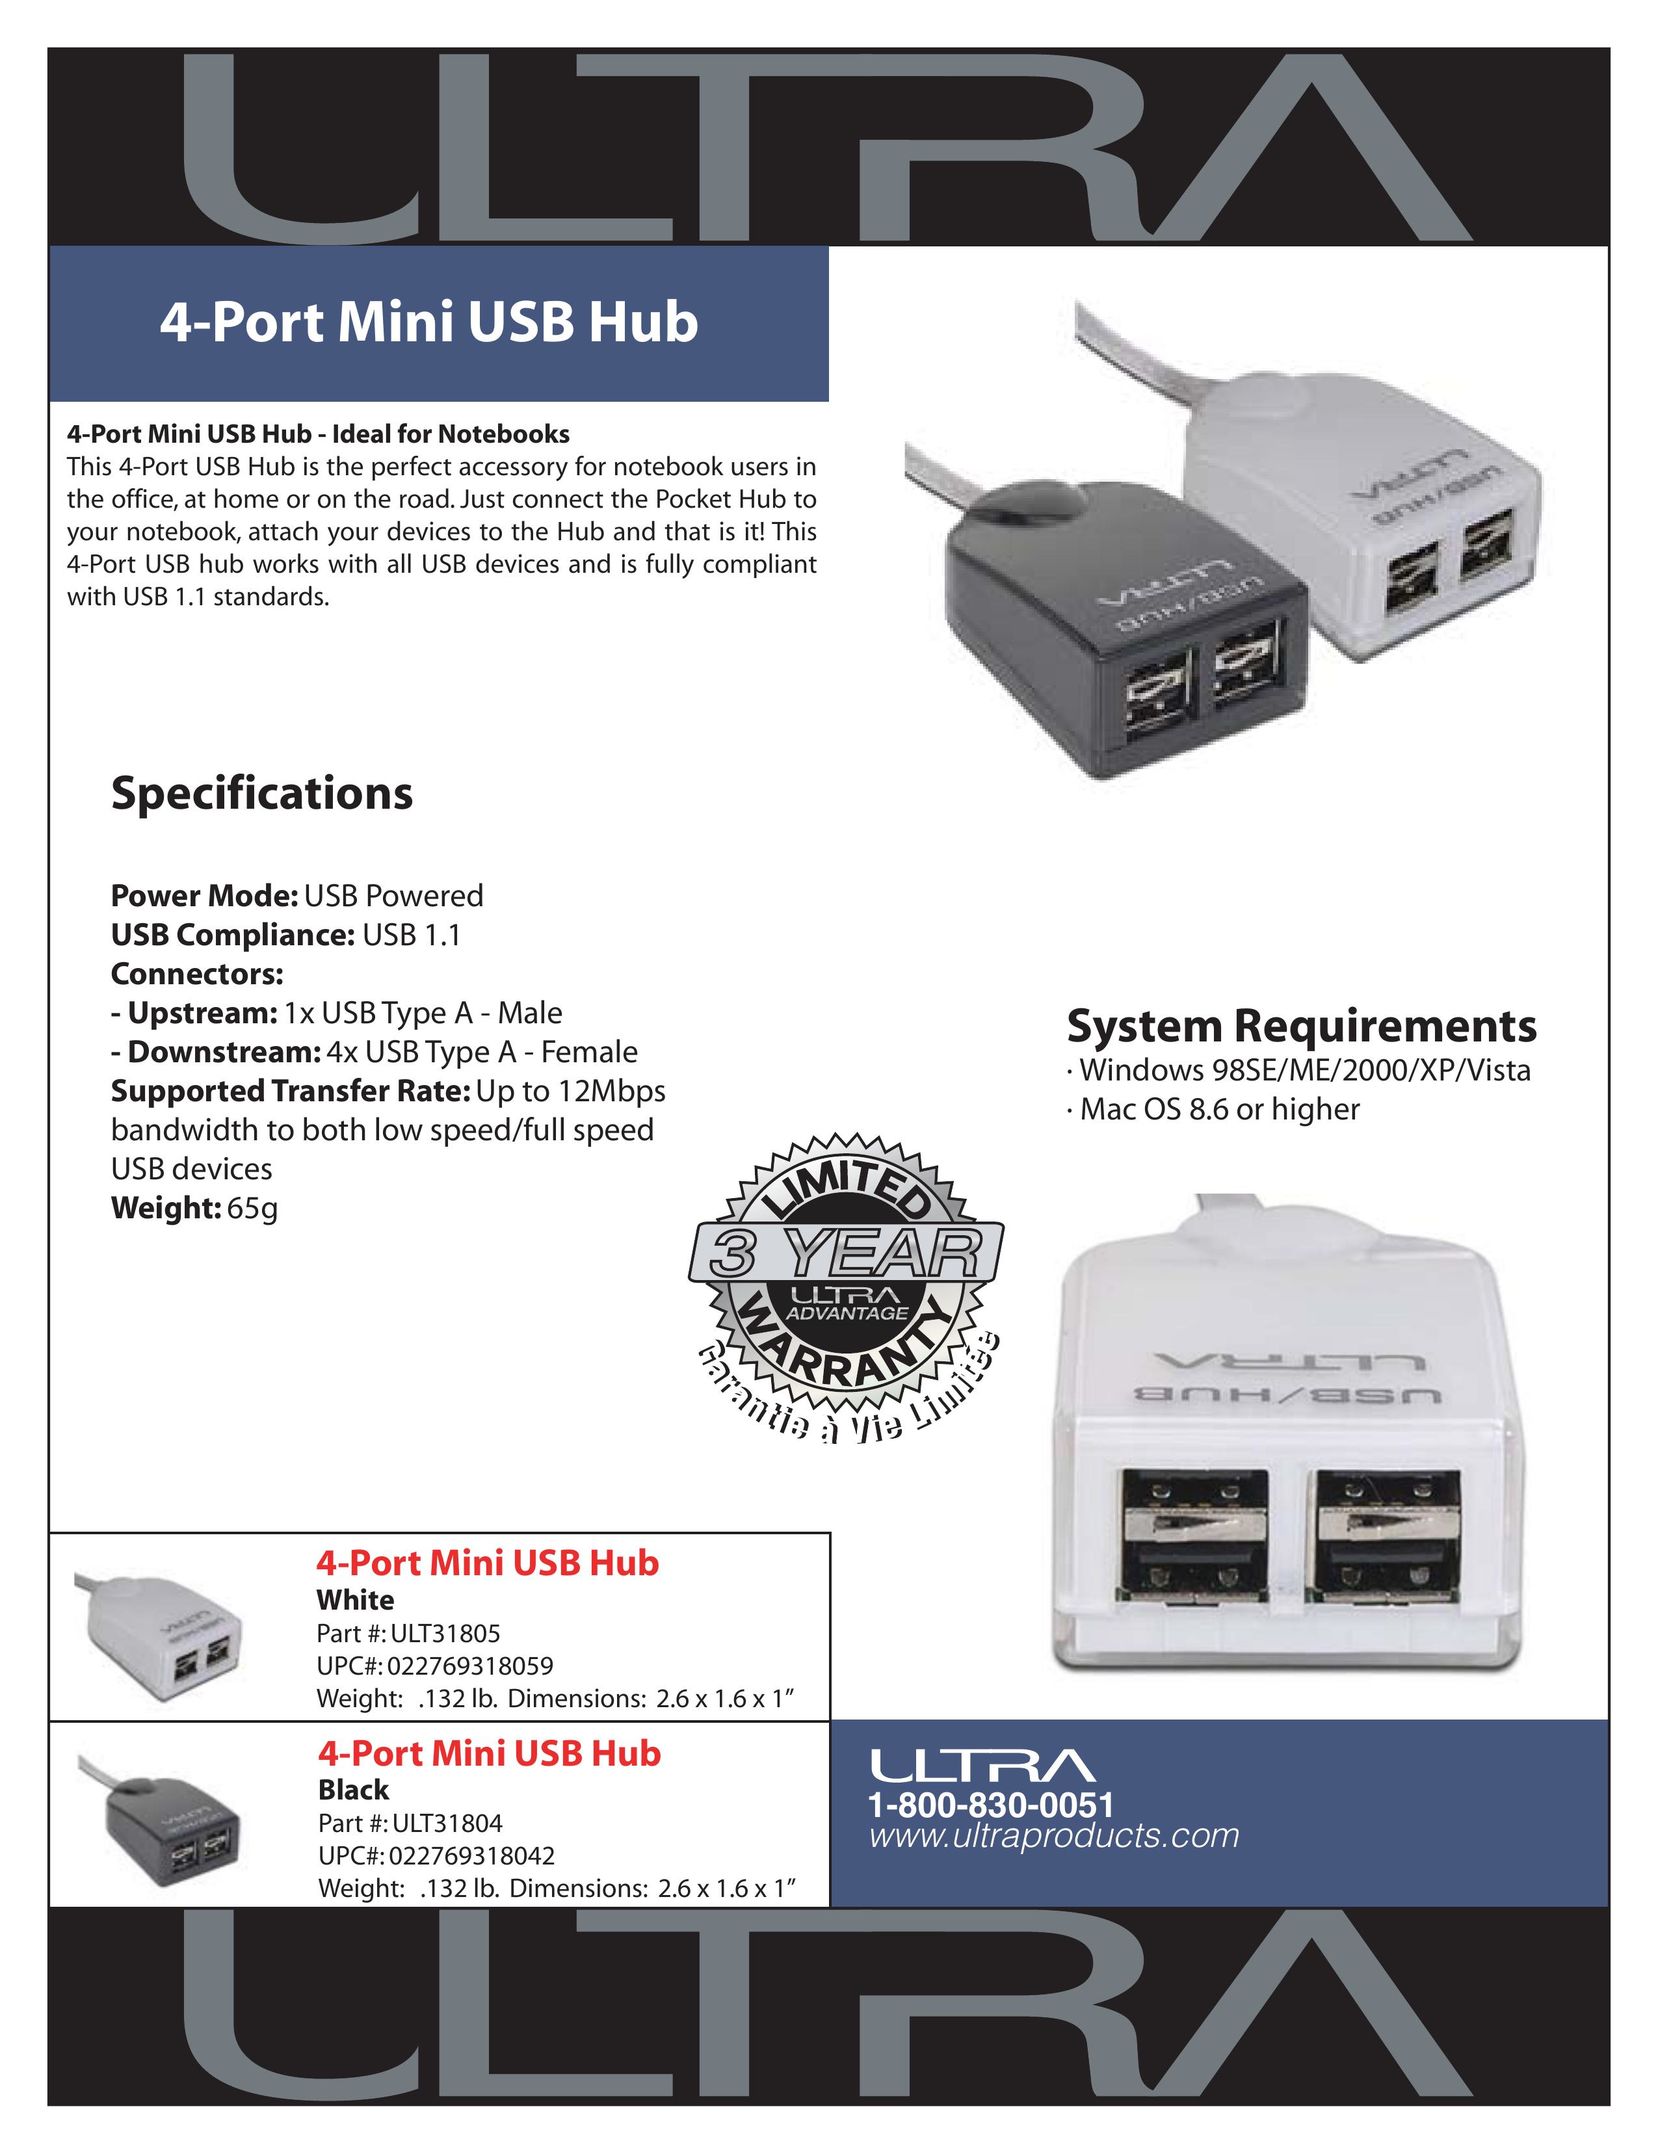 Ultra Products ULT31805 Switch User Manual